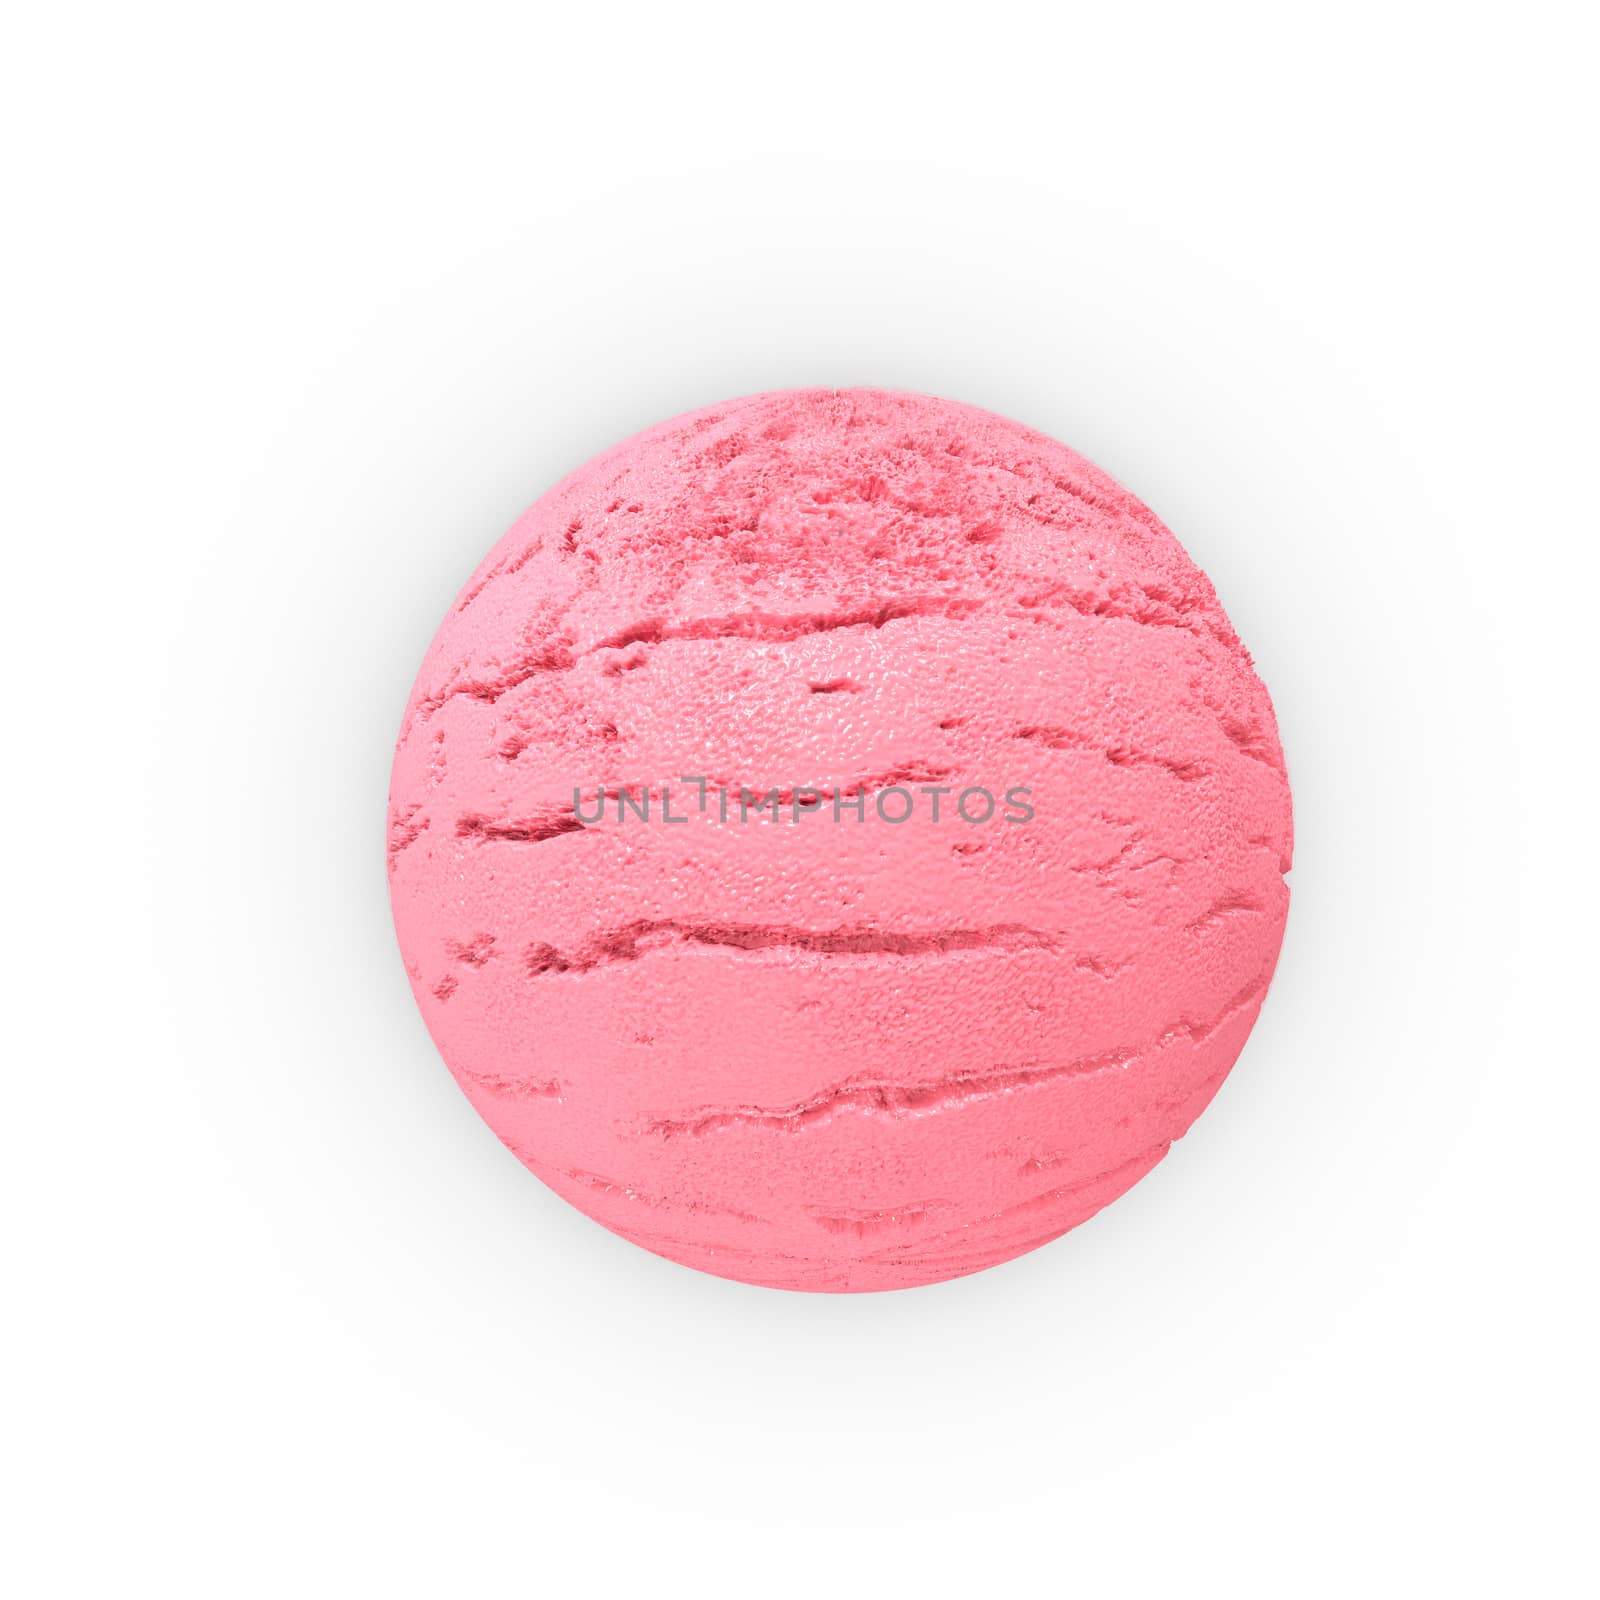 Scoop of strawberry ice ball. Extreme close-up view. 3D Rendering